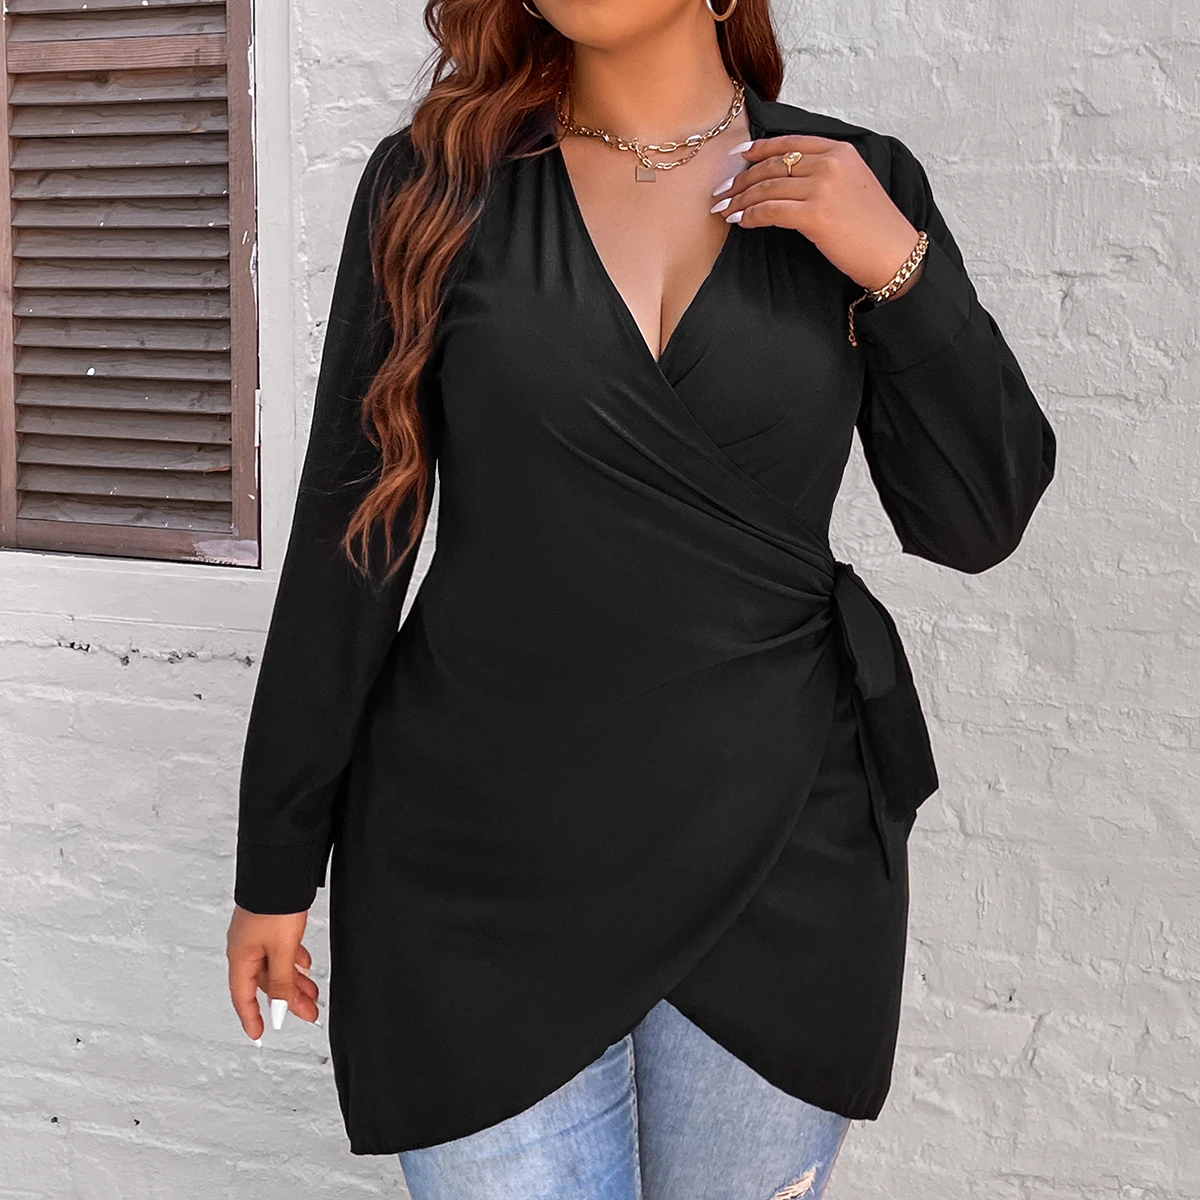 Large Plus Size 4XL Blouse for Women 2022 Peplum Tunic Tops Autumn Winter Black Belt Curvy Casual Oversized Solid Loose T Shirts